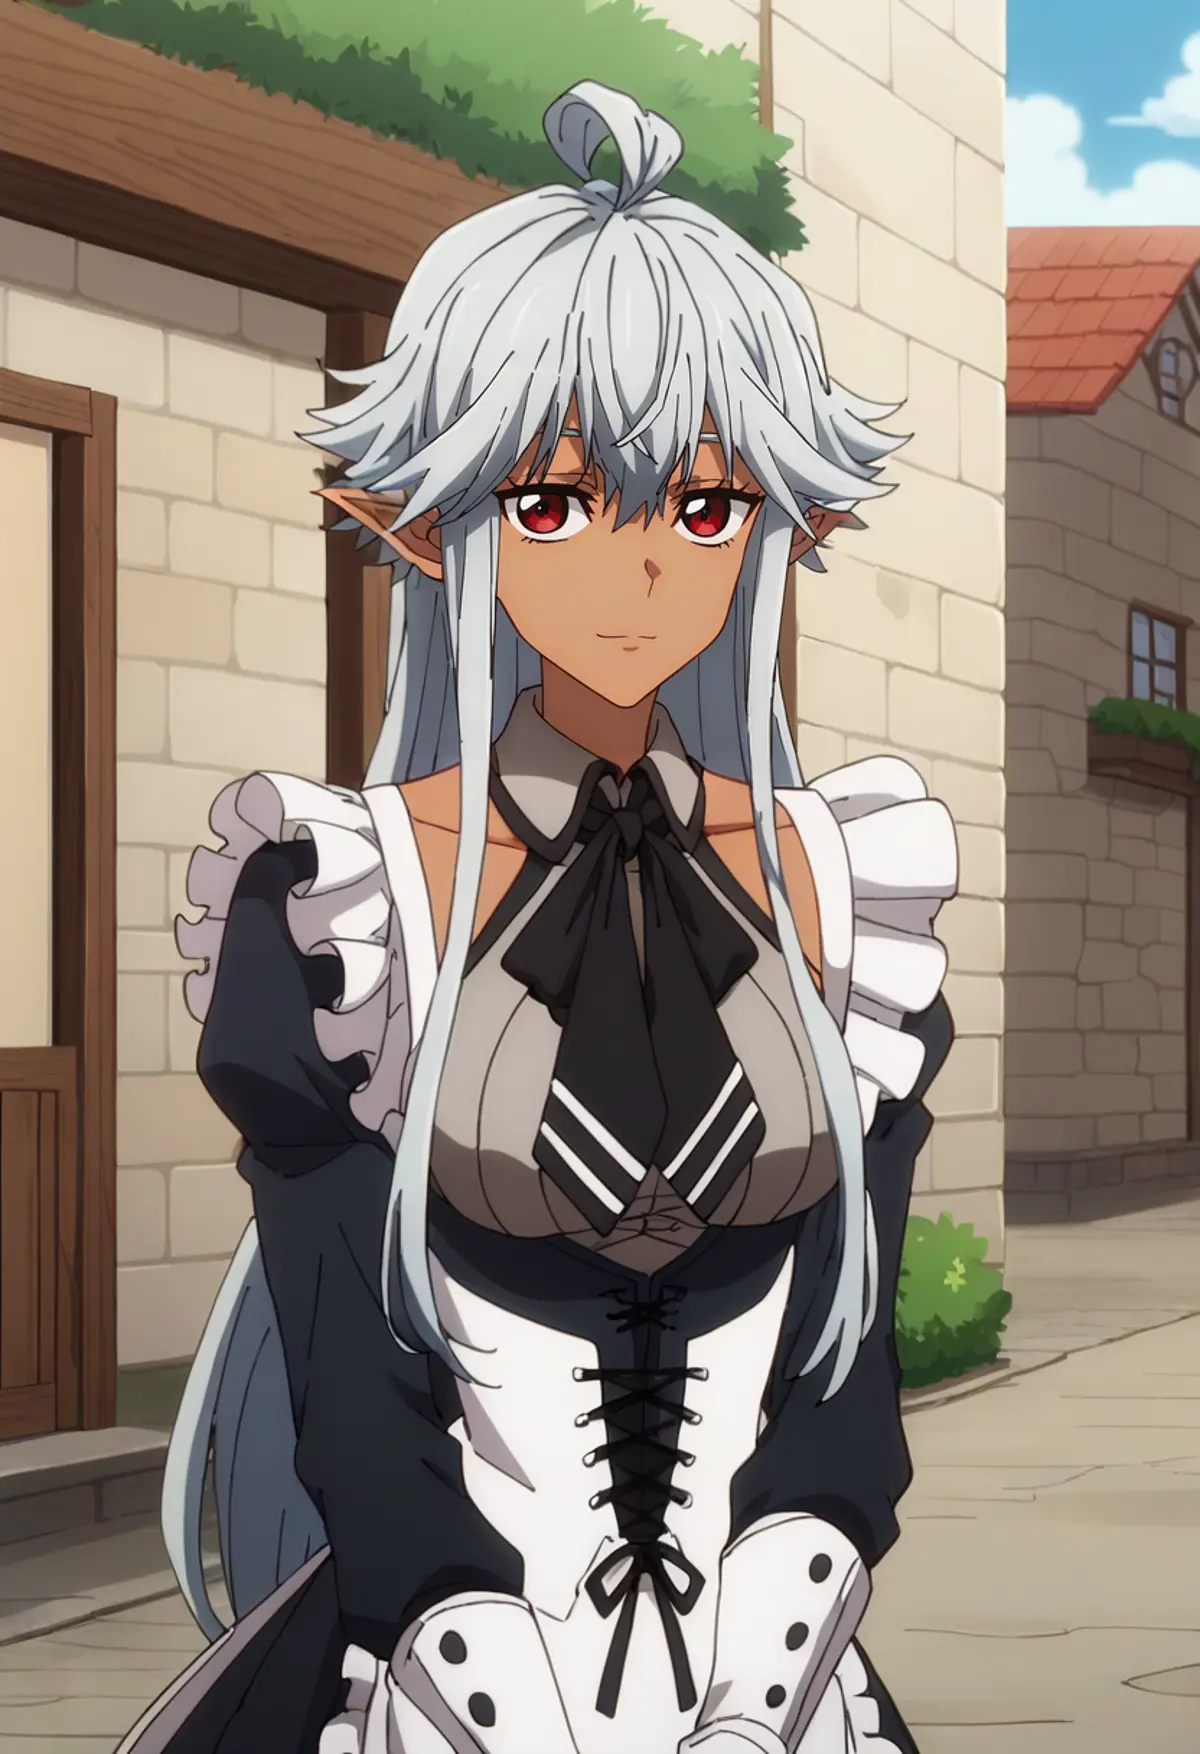 A woman with silver hair and pointed ears wearing a maid outfit standing in front of a building with a European architectural style. She is looking directly at the viewer with her hands held in front of her at her waist.